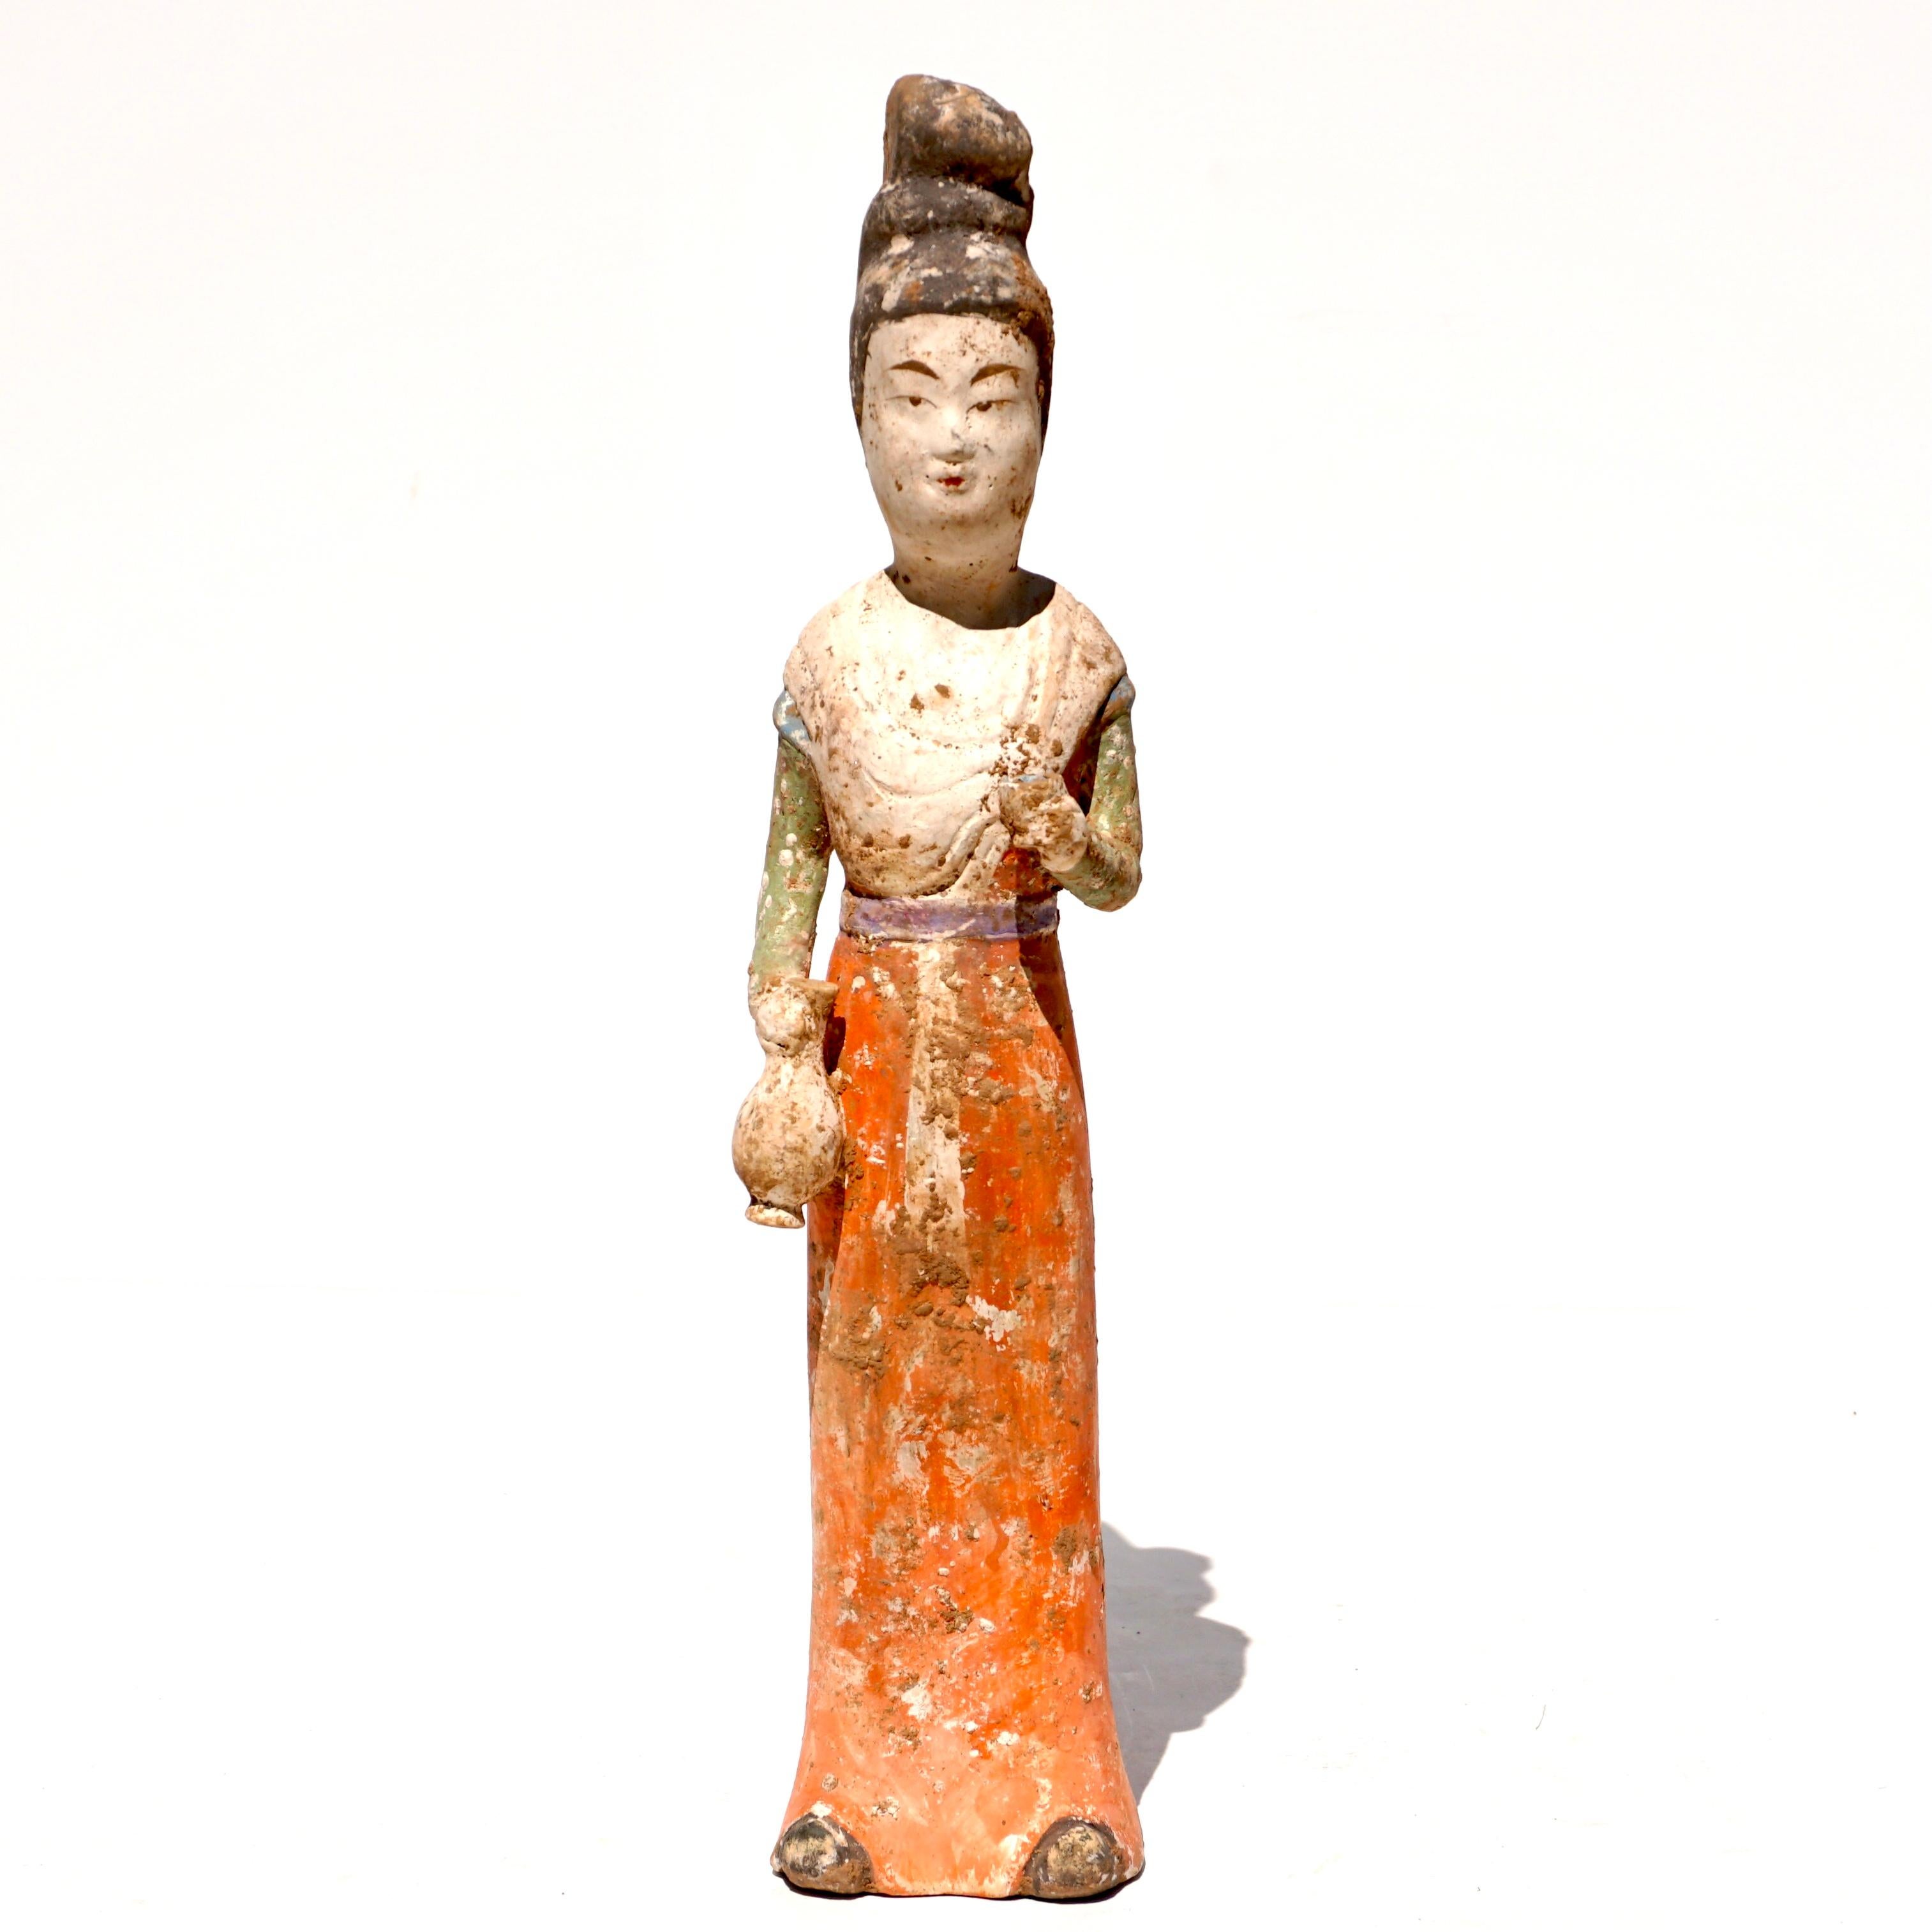 Circa 618-907 ADA mold-formed pottery tomb attendant figure in the form of a woman who is wearing a lengthy robe with a red-painted skirt, upper clothing in green, her left arm by her side holding a vessel and her right hand outstretched, she is